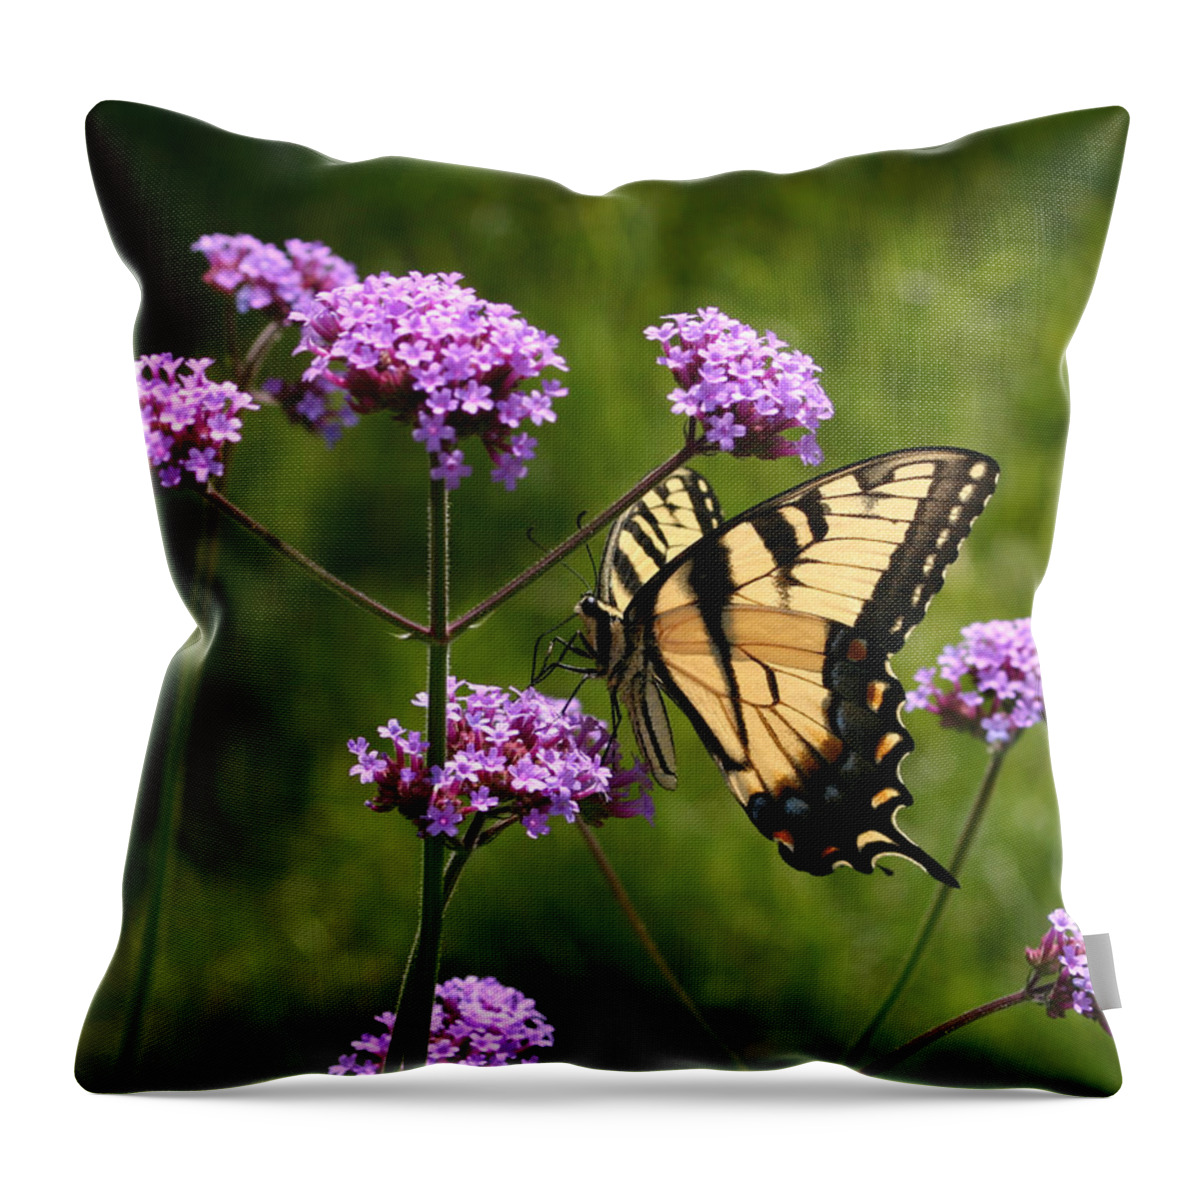 Butterfly Throw Pillow featuring the photograph Tiger Swallowtail Among the Verbena by Robert E Alter Reflections of Infinity